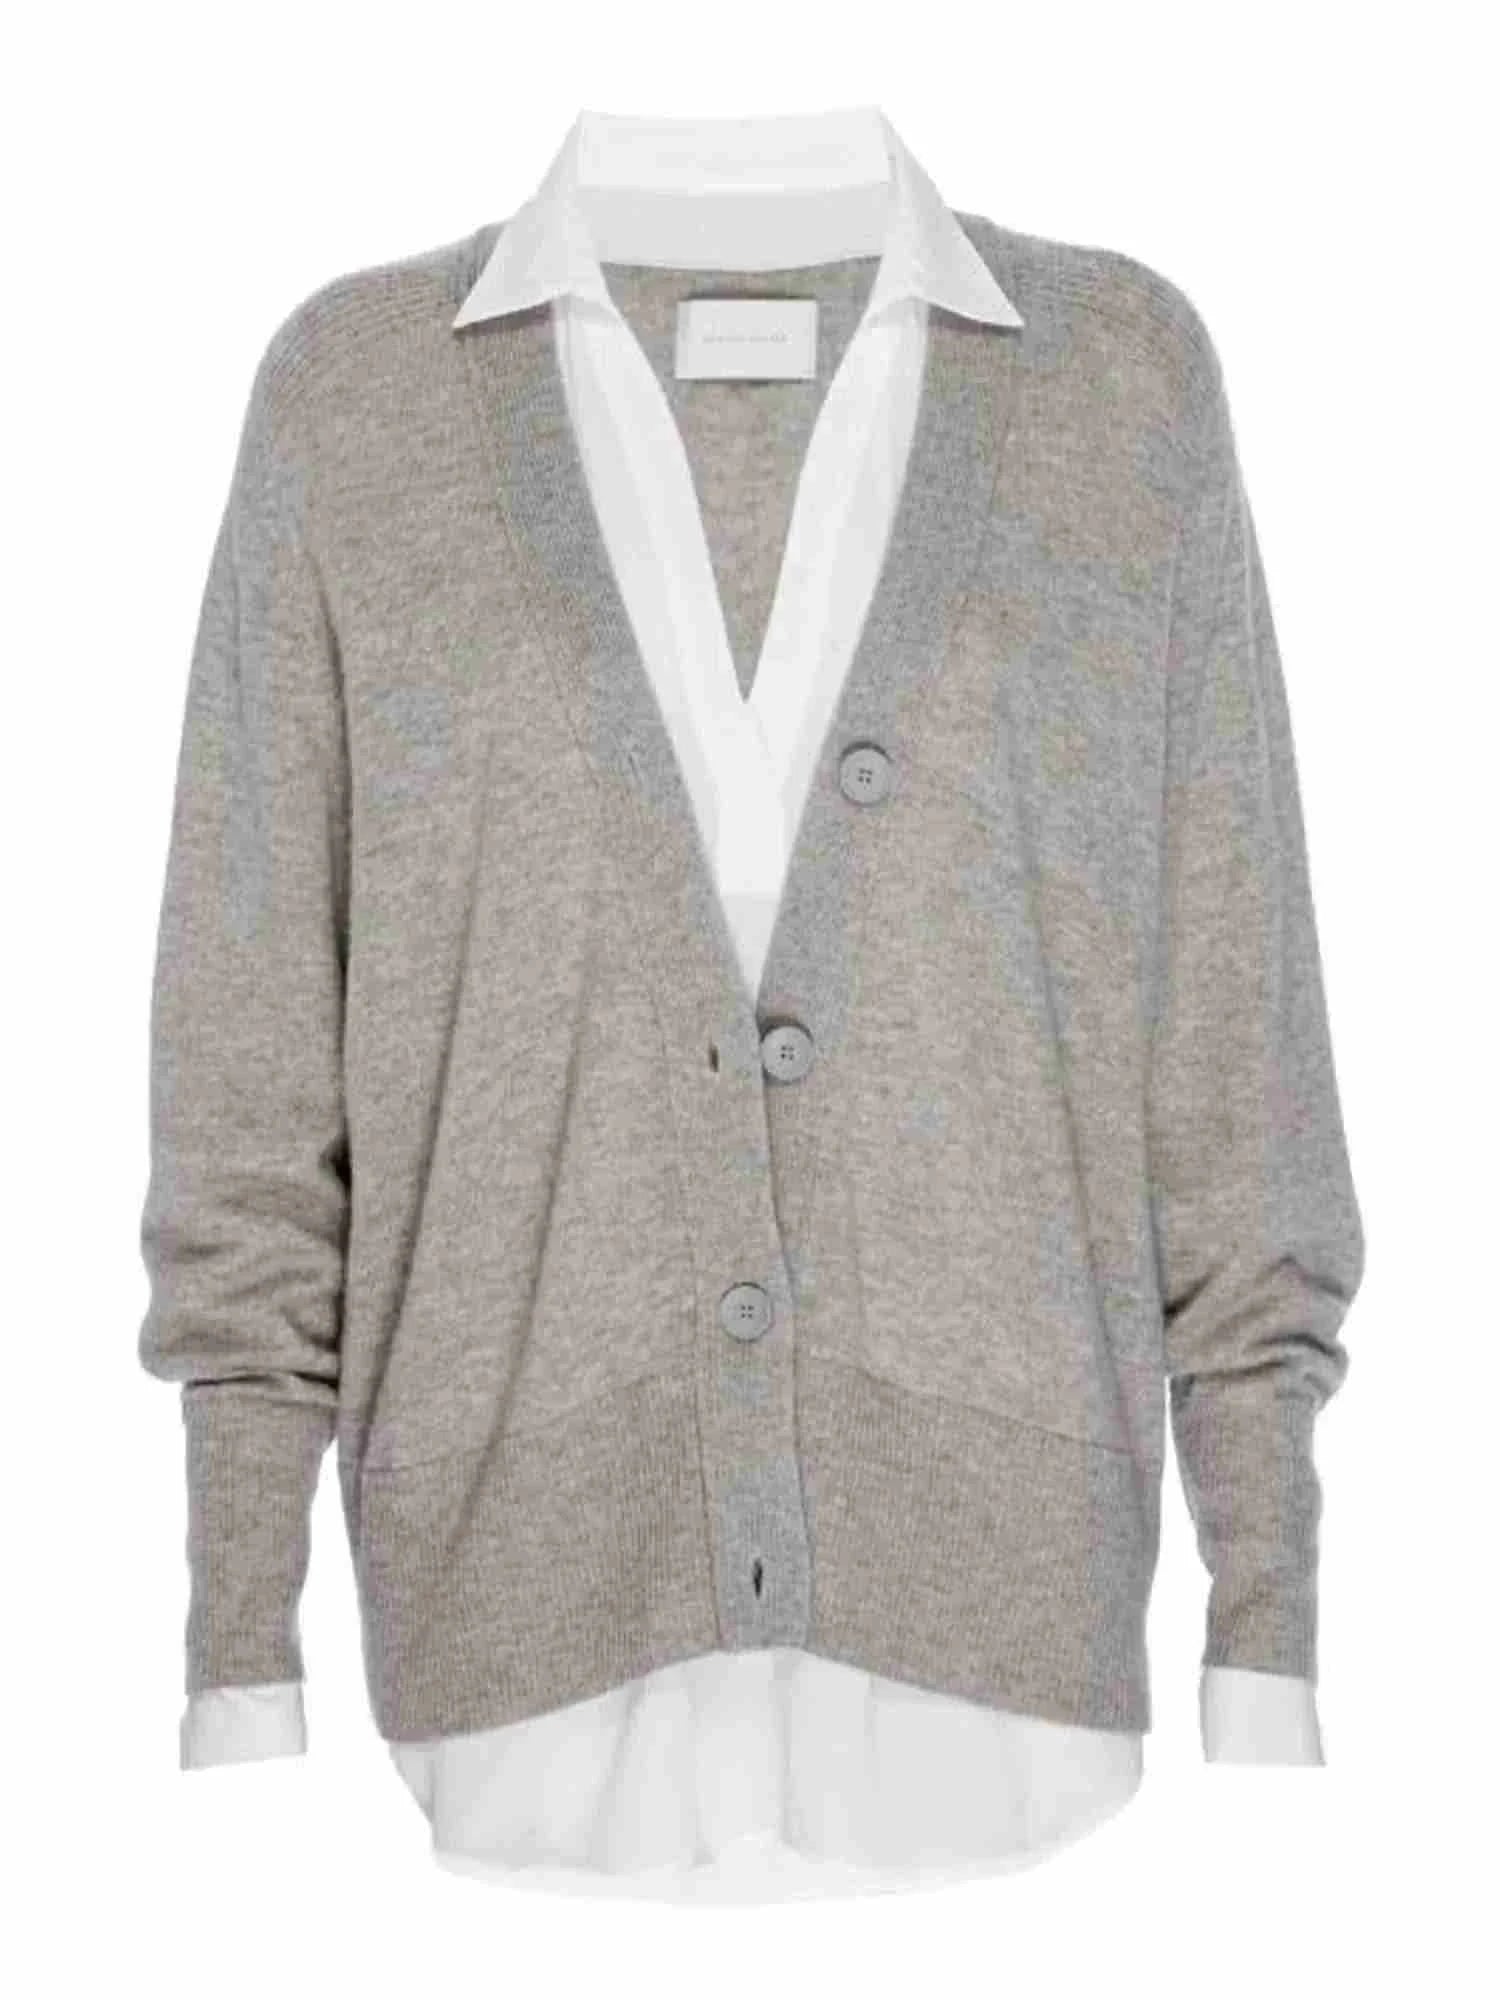 update 202402201526 THE CALLIE LAYERED LOOKER CARDIGAN